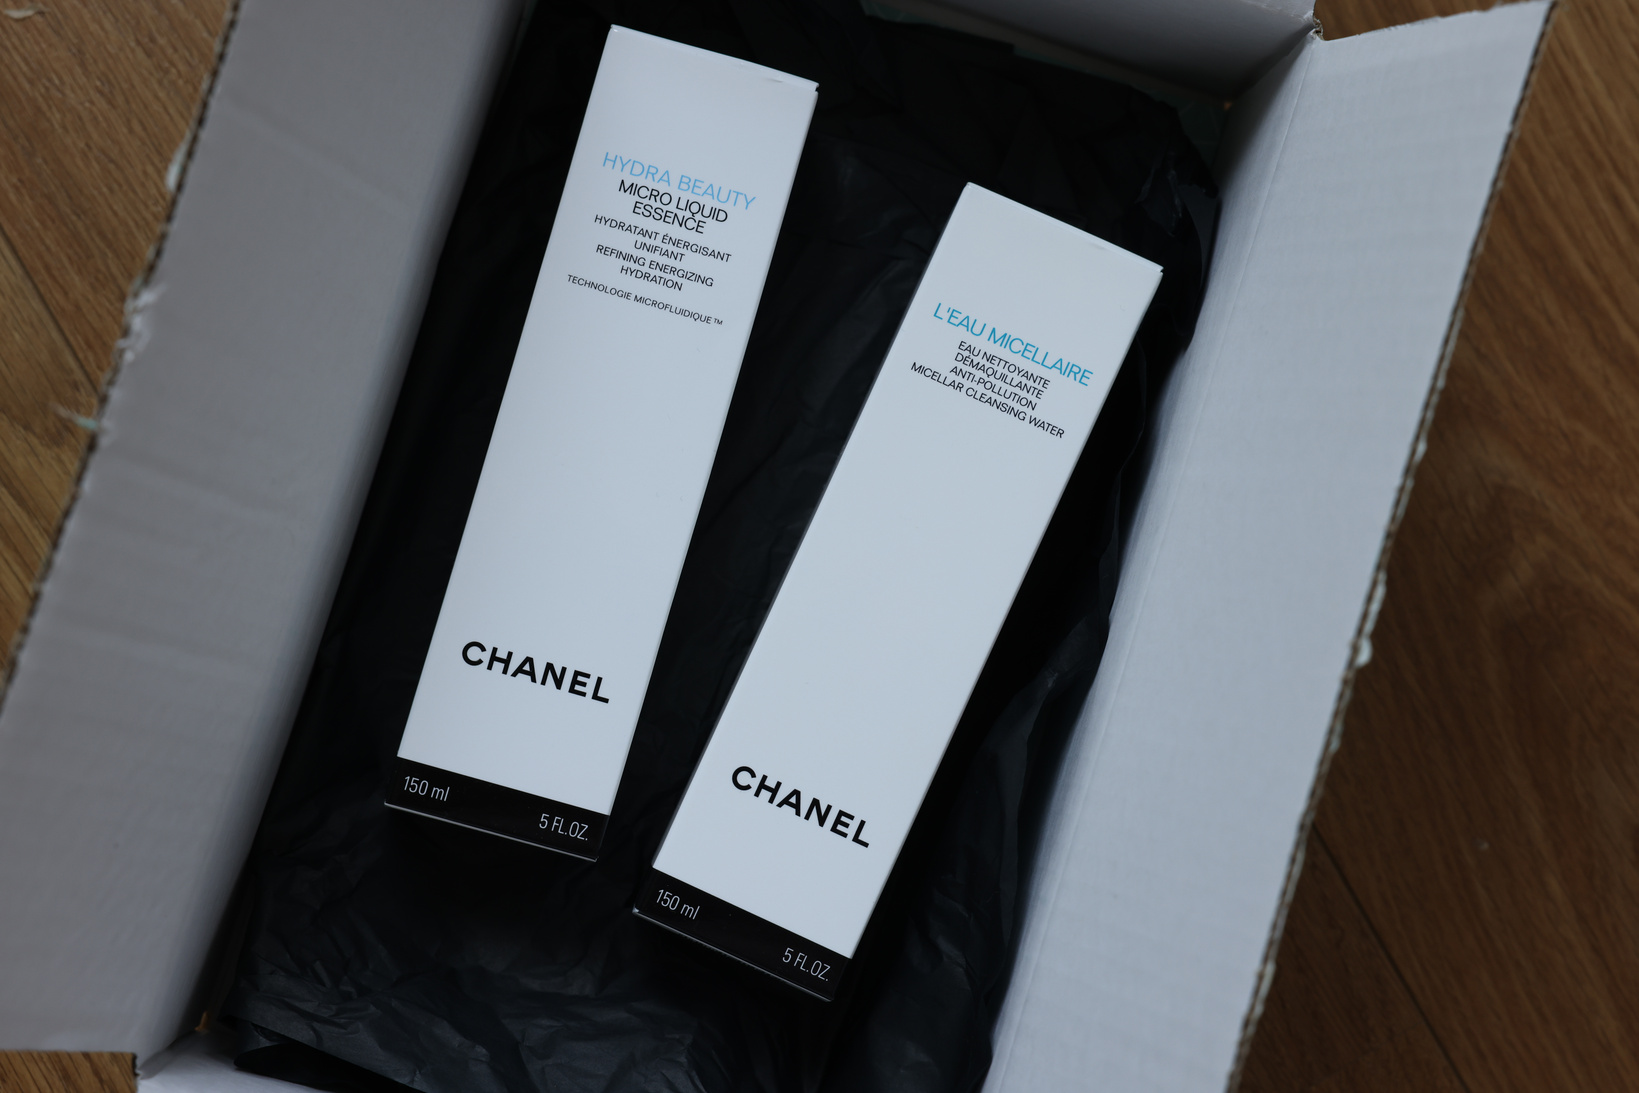 NETHERLANDS, LEIDEN - JULY 12, 2022: Chanel Micellar Water and Micro Liquid Essence in Box on Wooden Table, Top View